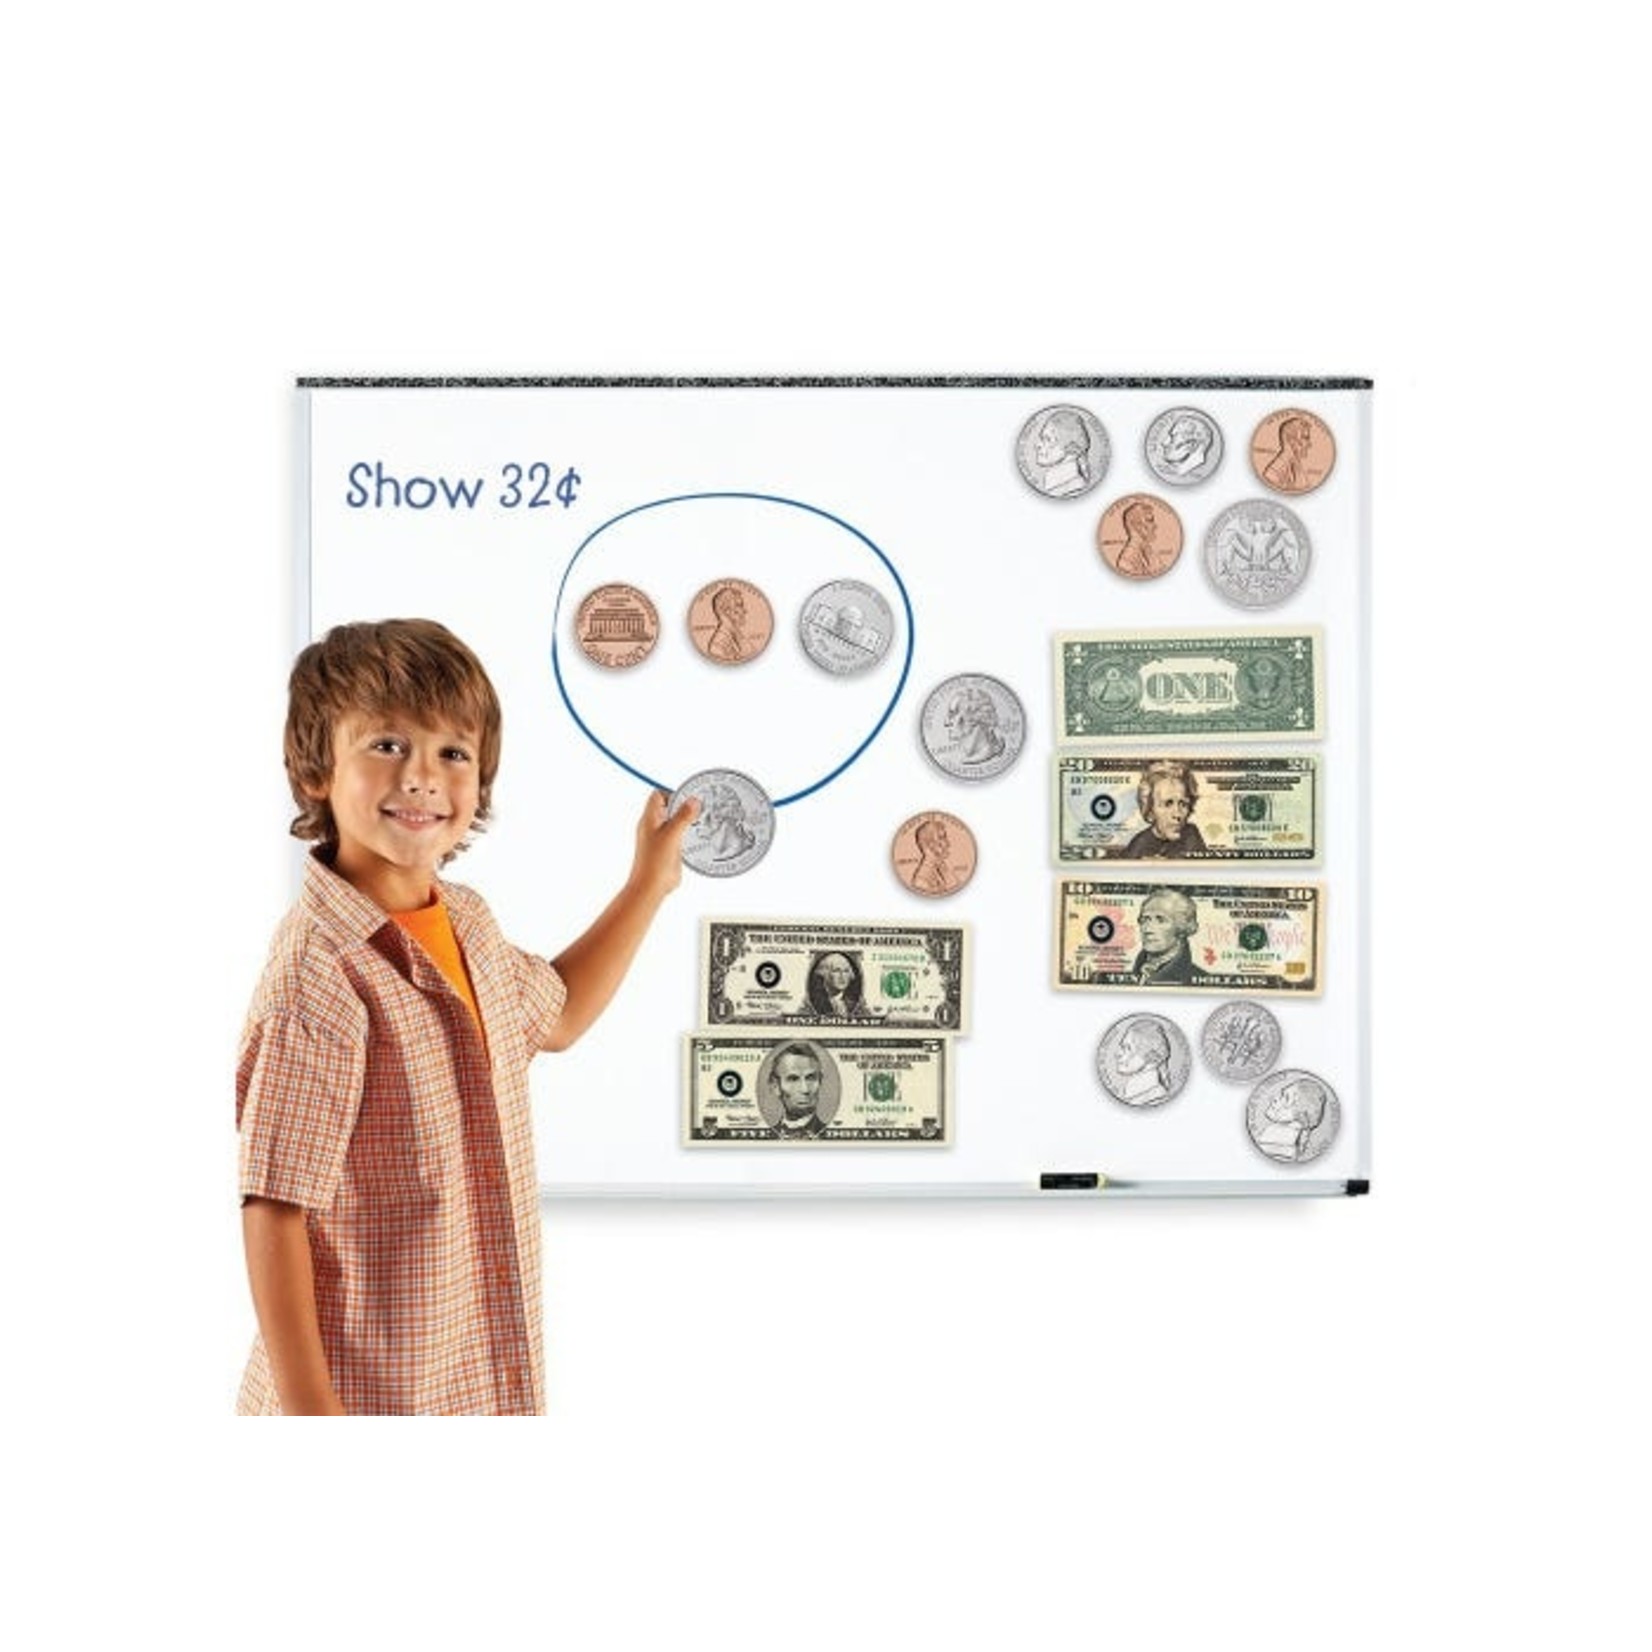 LEARNING RESOURCES INC Double-Sided Magnetic Money